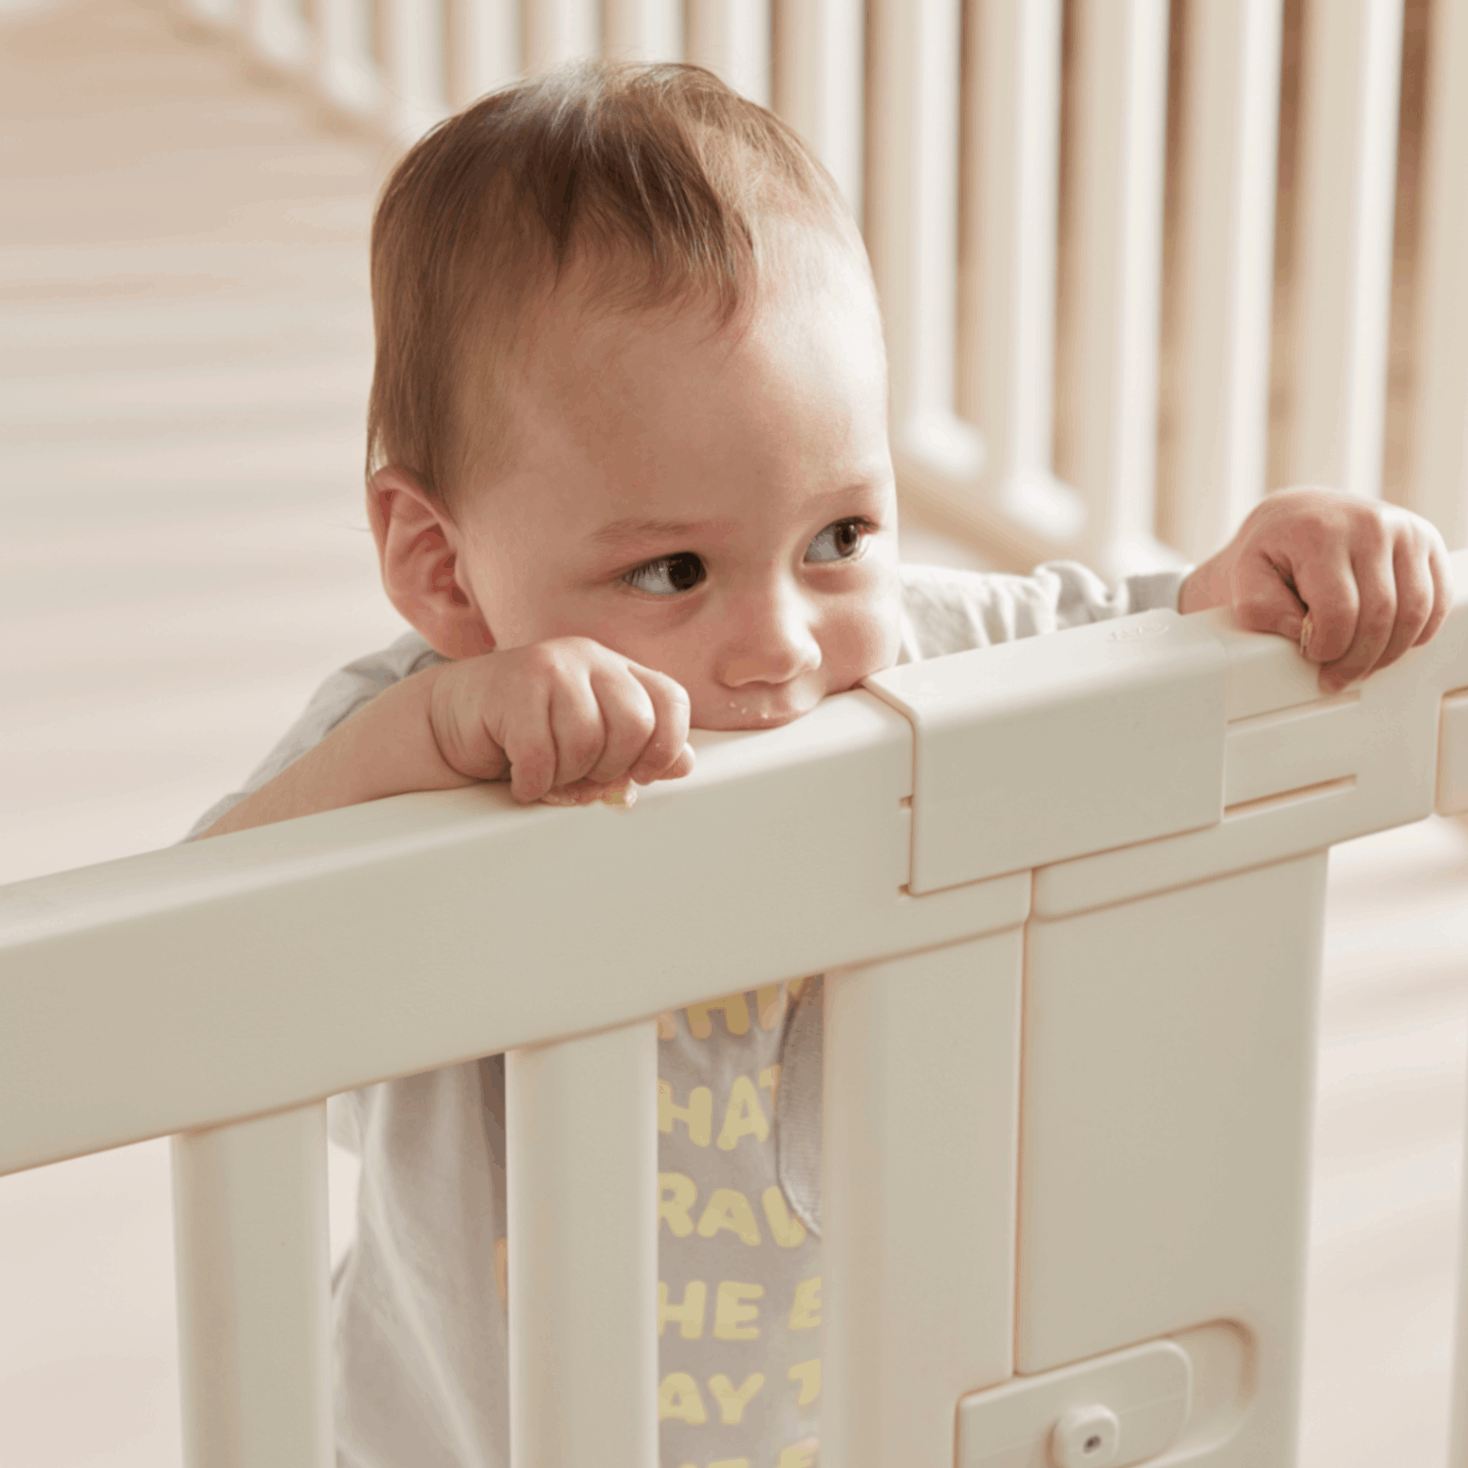 A cute baby enjoying their time by playfully biting onto the Woodely Babyroom Fence